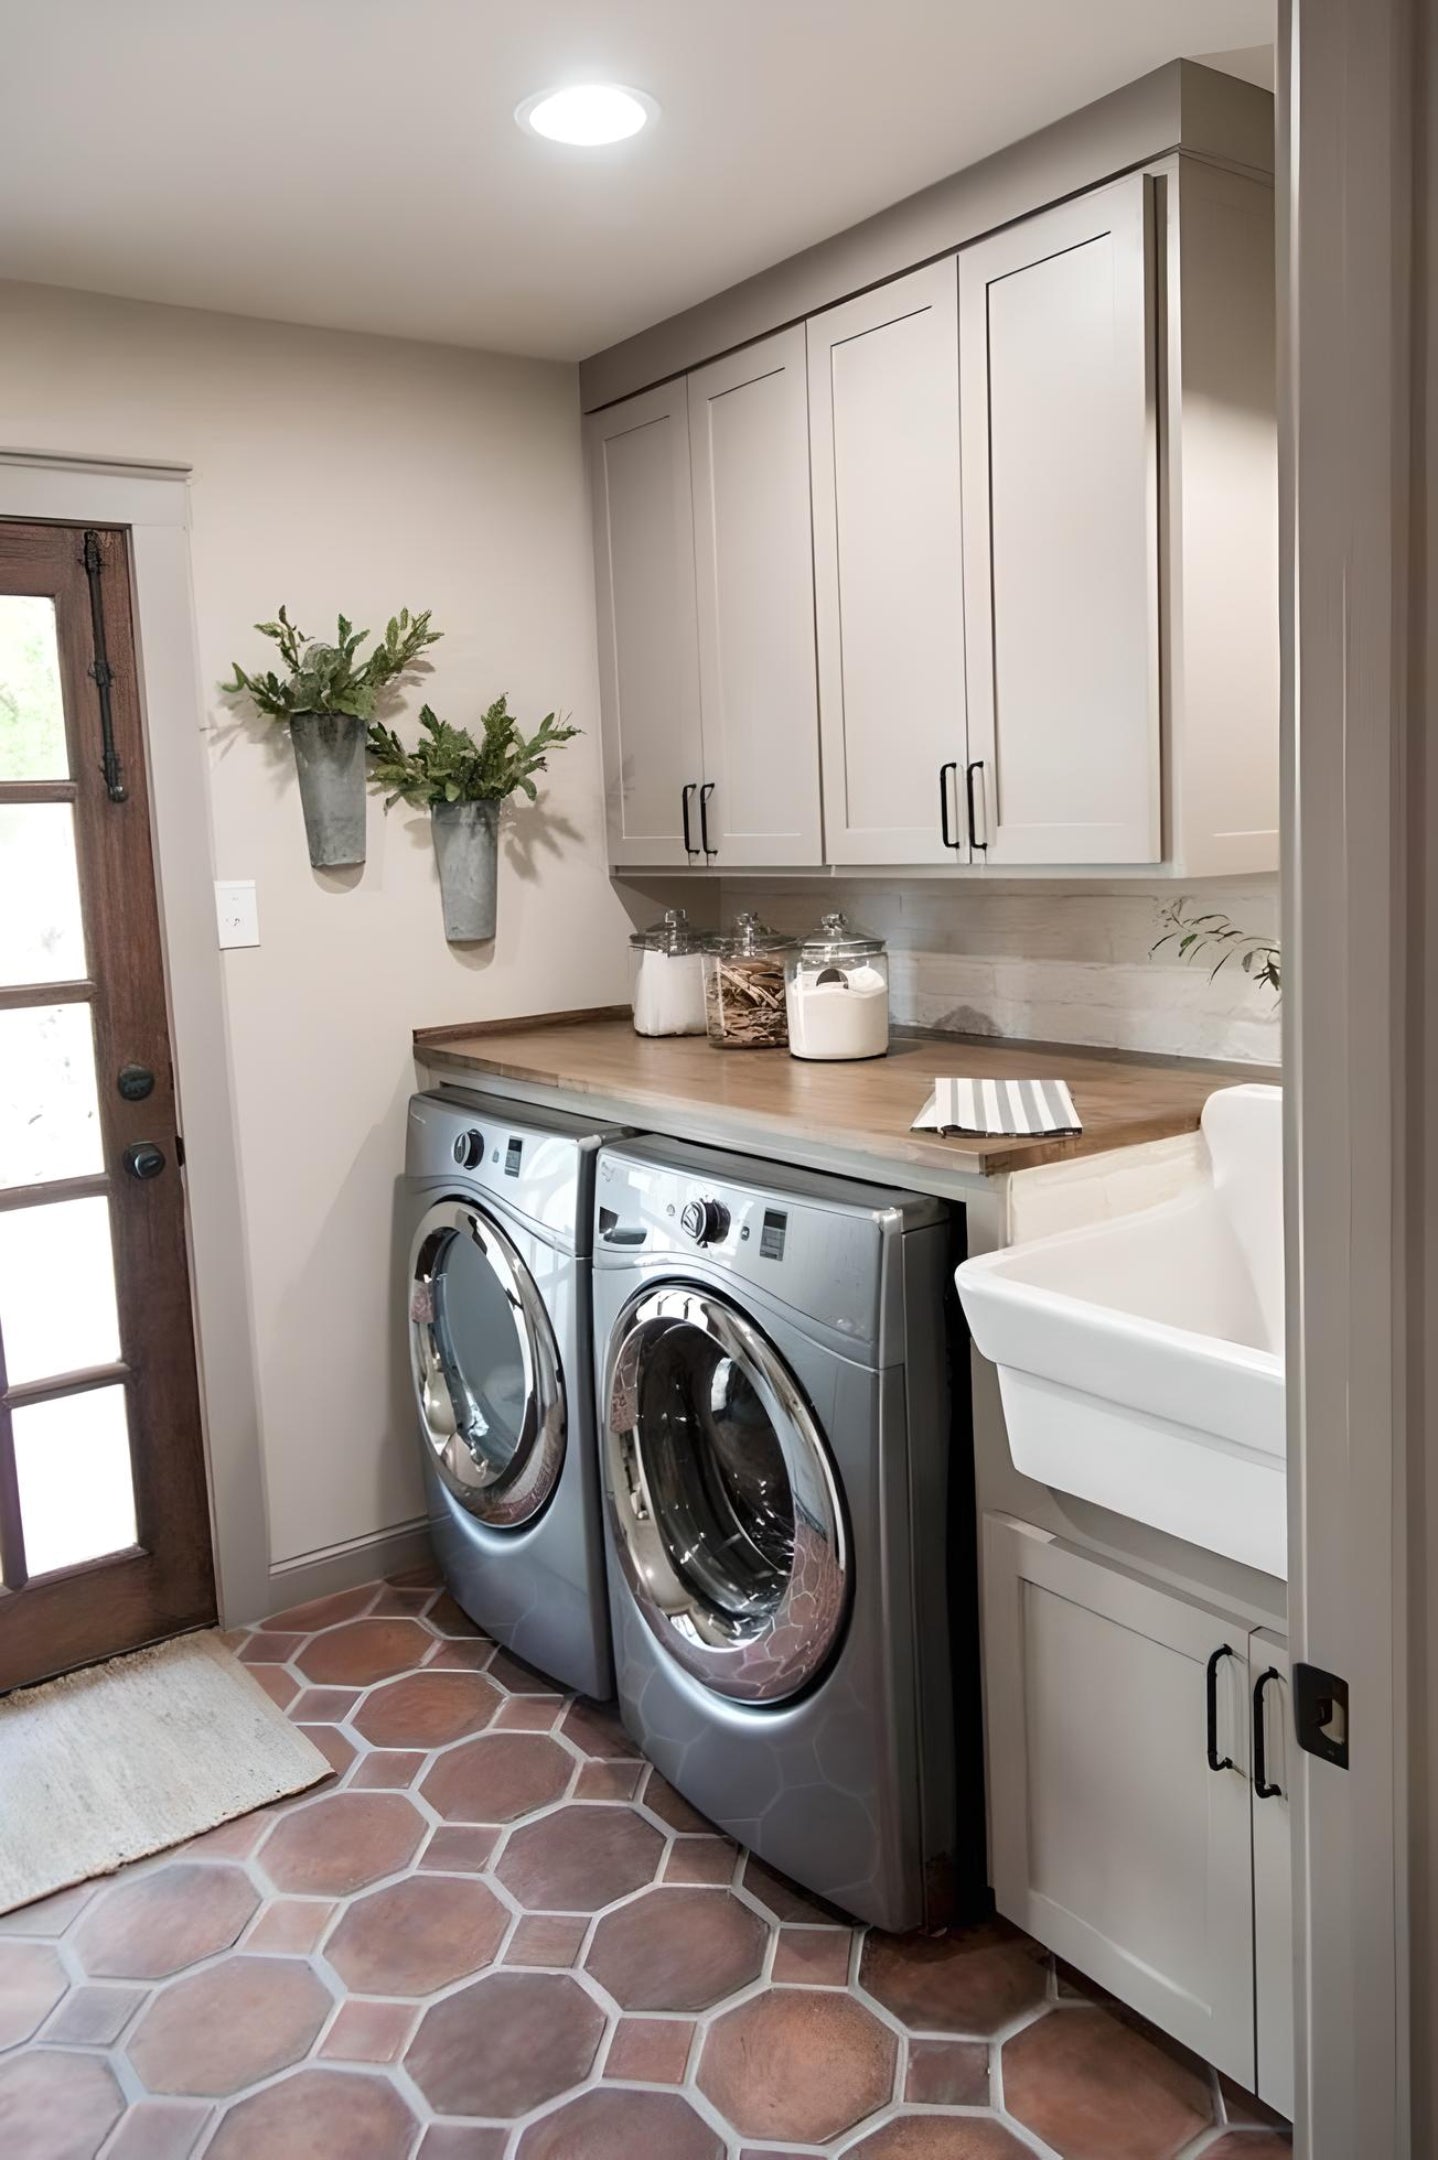 Transform Your Laundry Room with L&C Cabinetry: A Remodel That Blends Functionality and Style